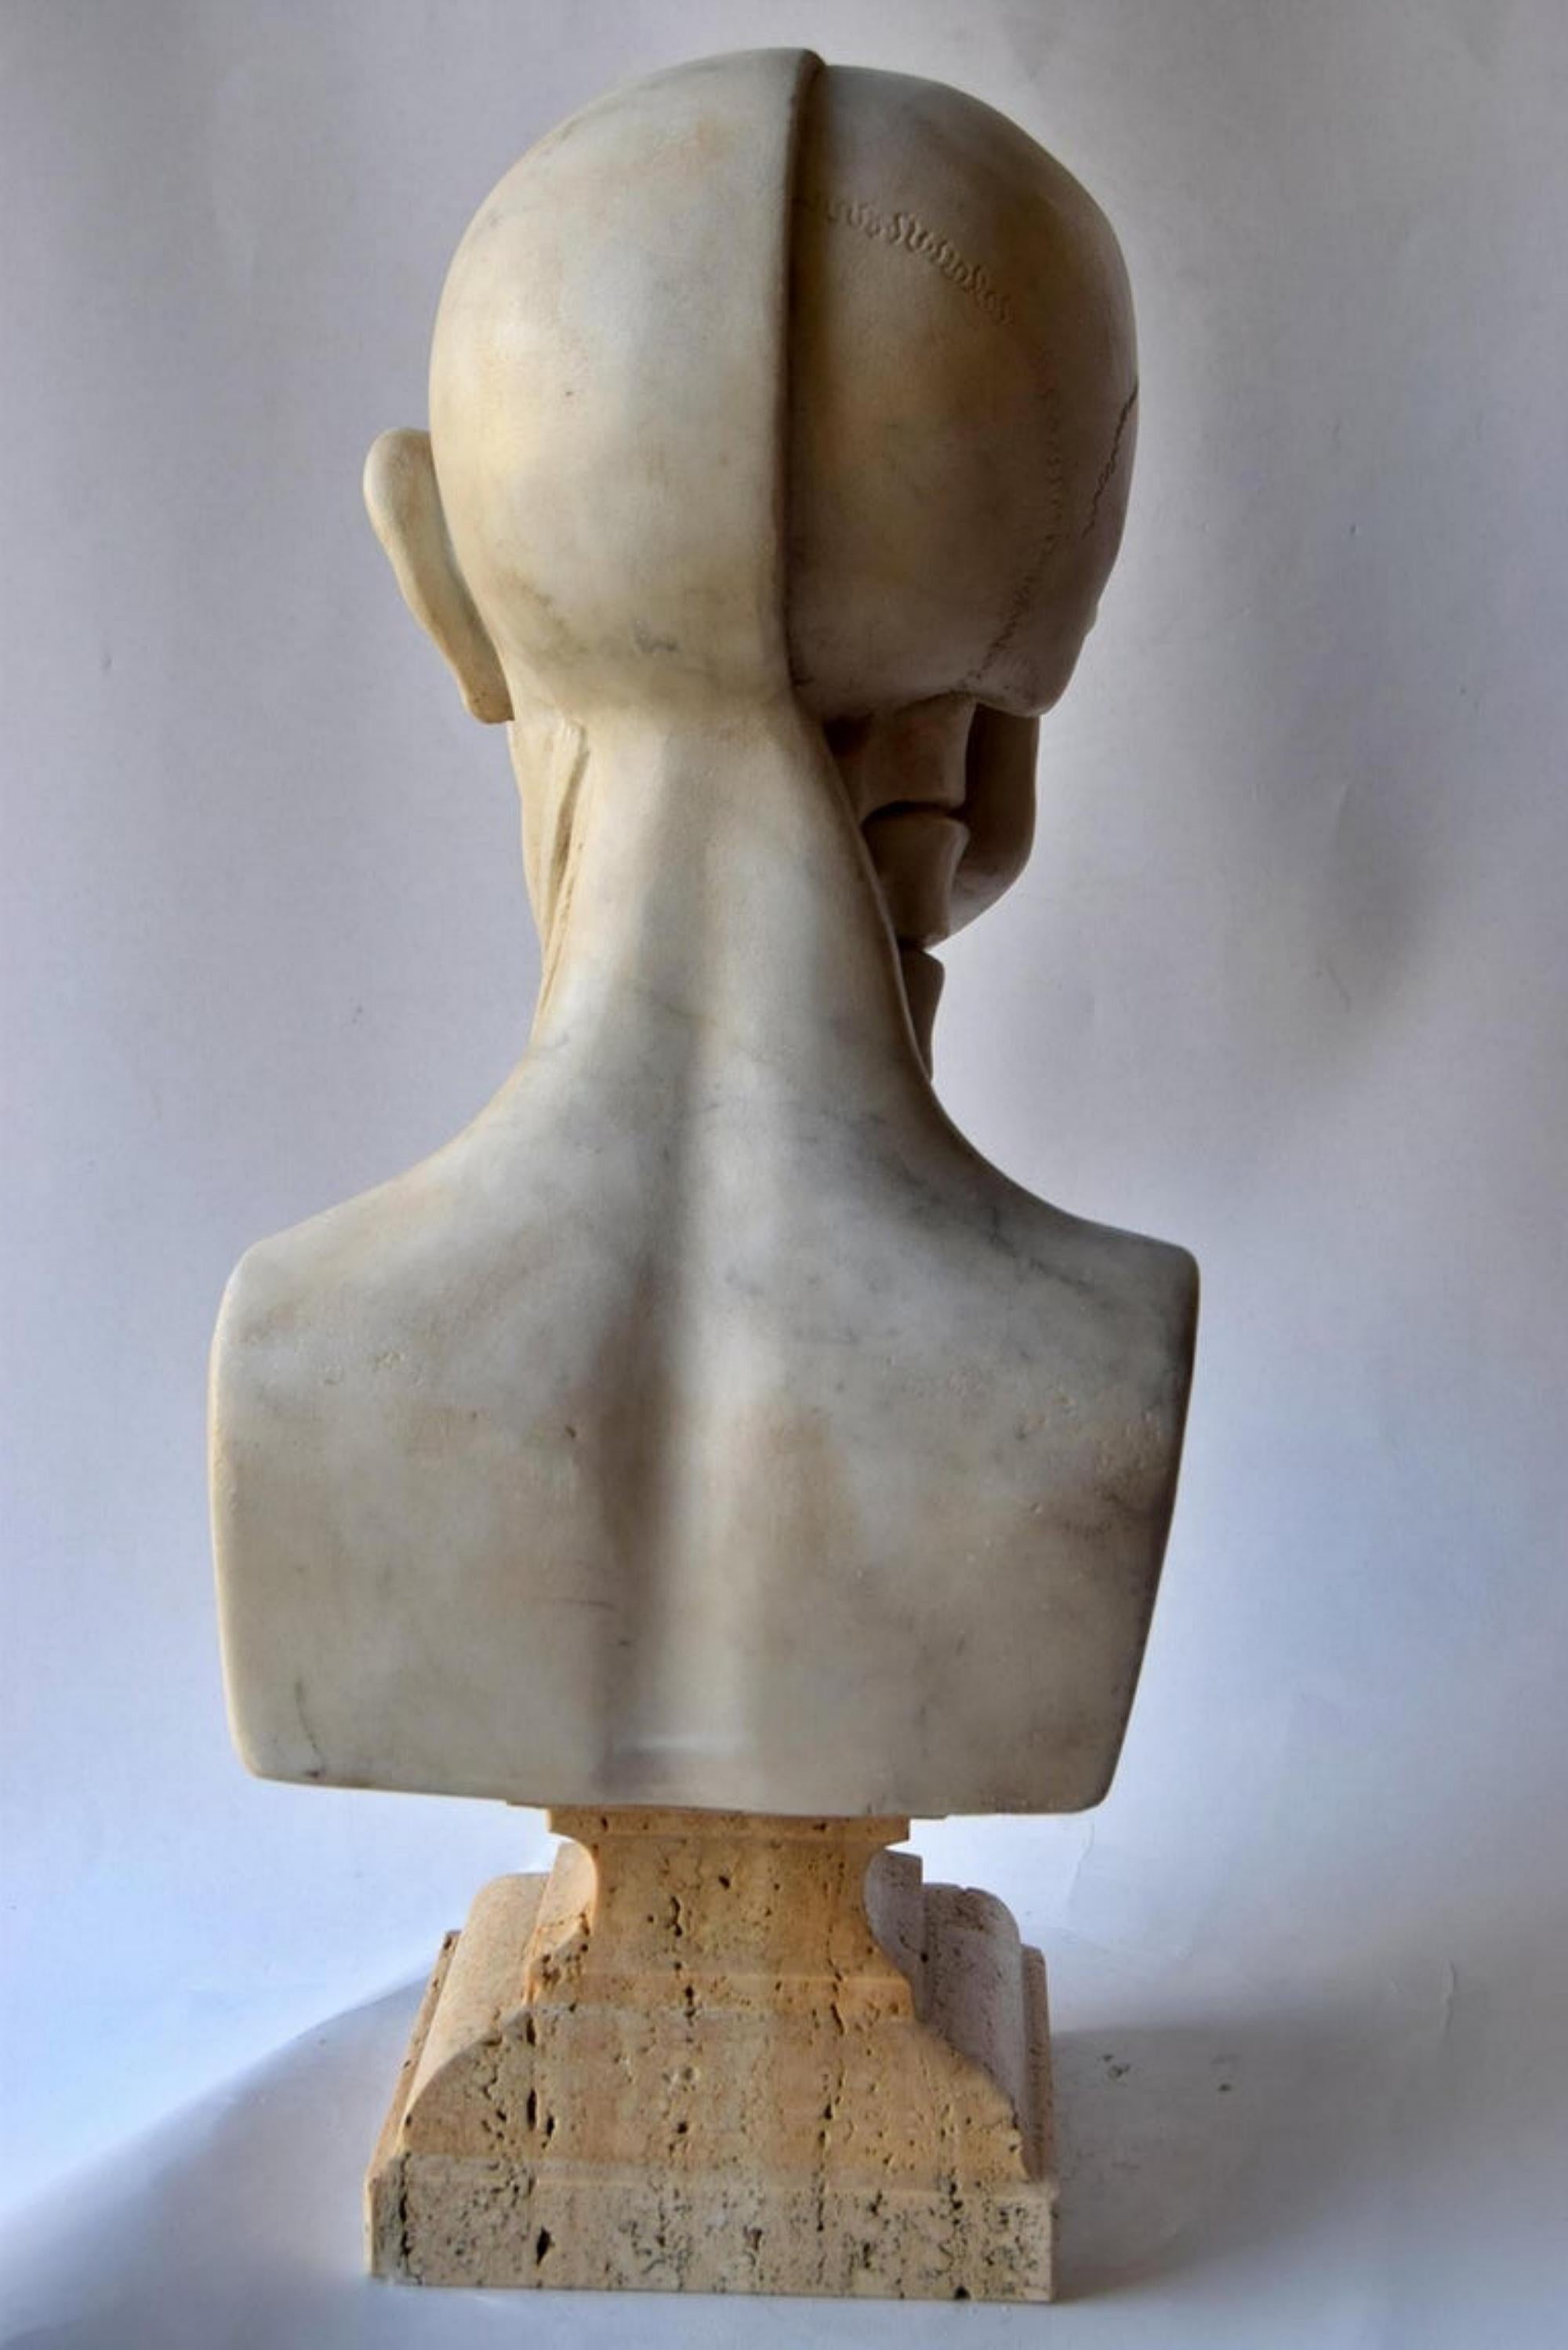 Anatomical Sculpture in White Carrara Marble, Early 20th Century For Sale 2